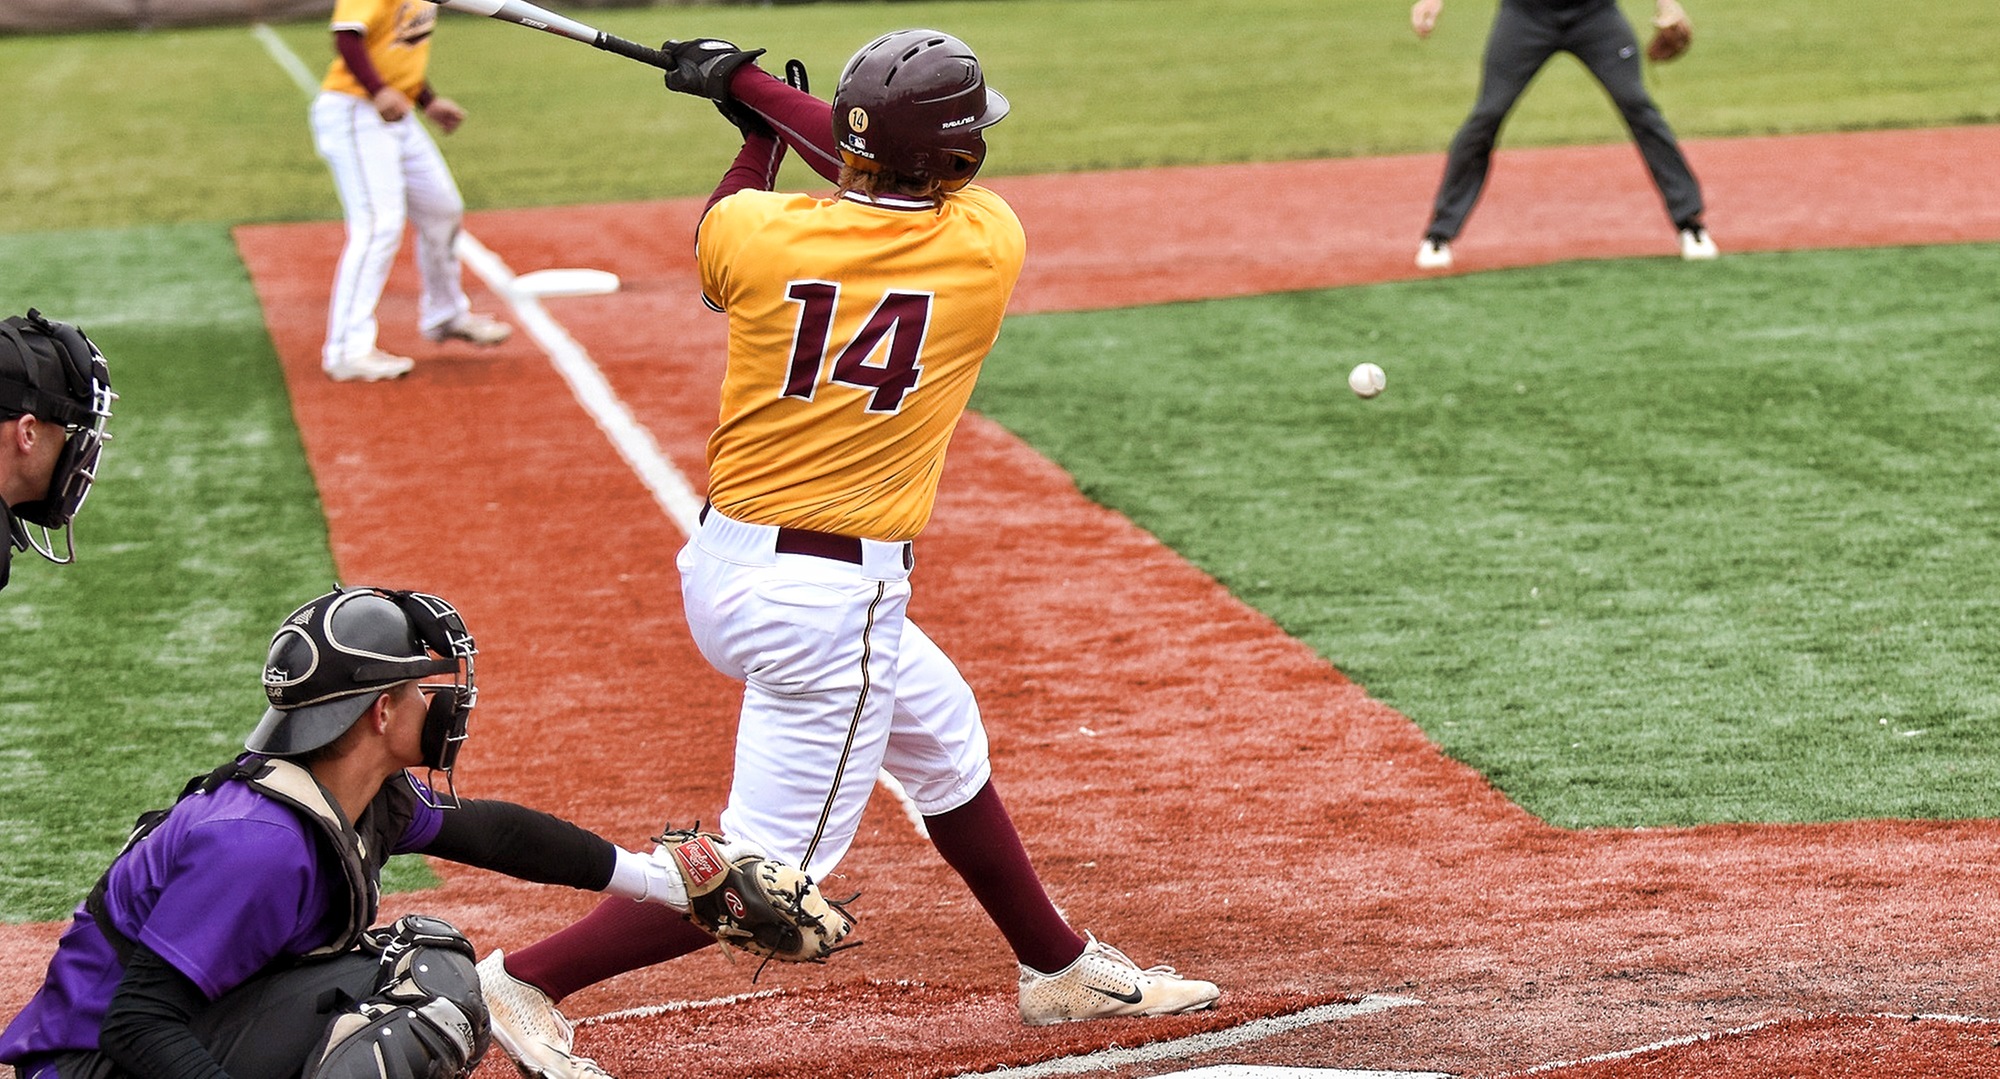 Senior Austin Ver Steeg was the only Cobber player to have a hit in both games of the team's doubleheader with Dickinson.